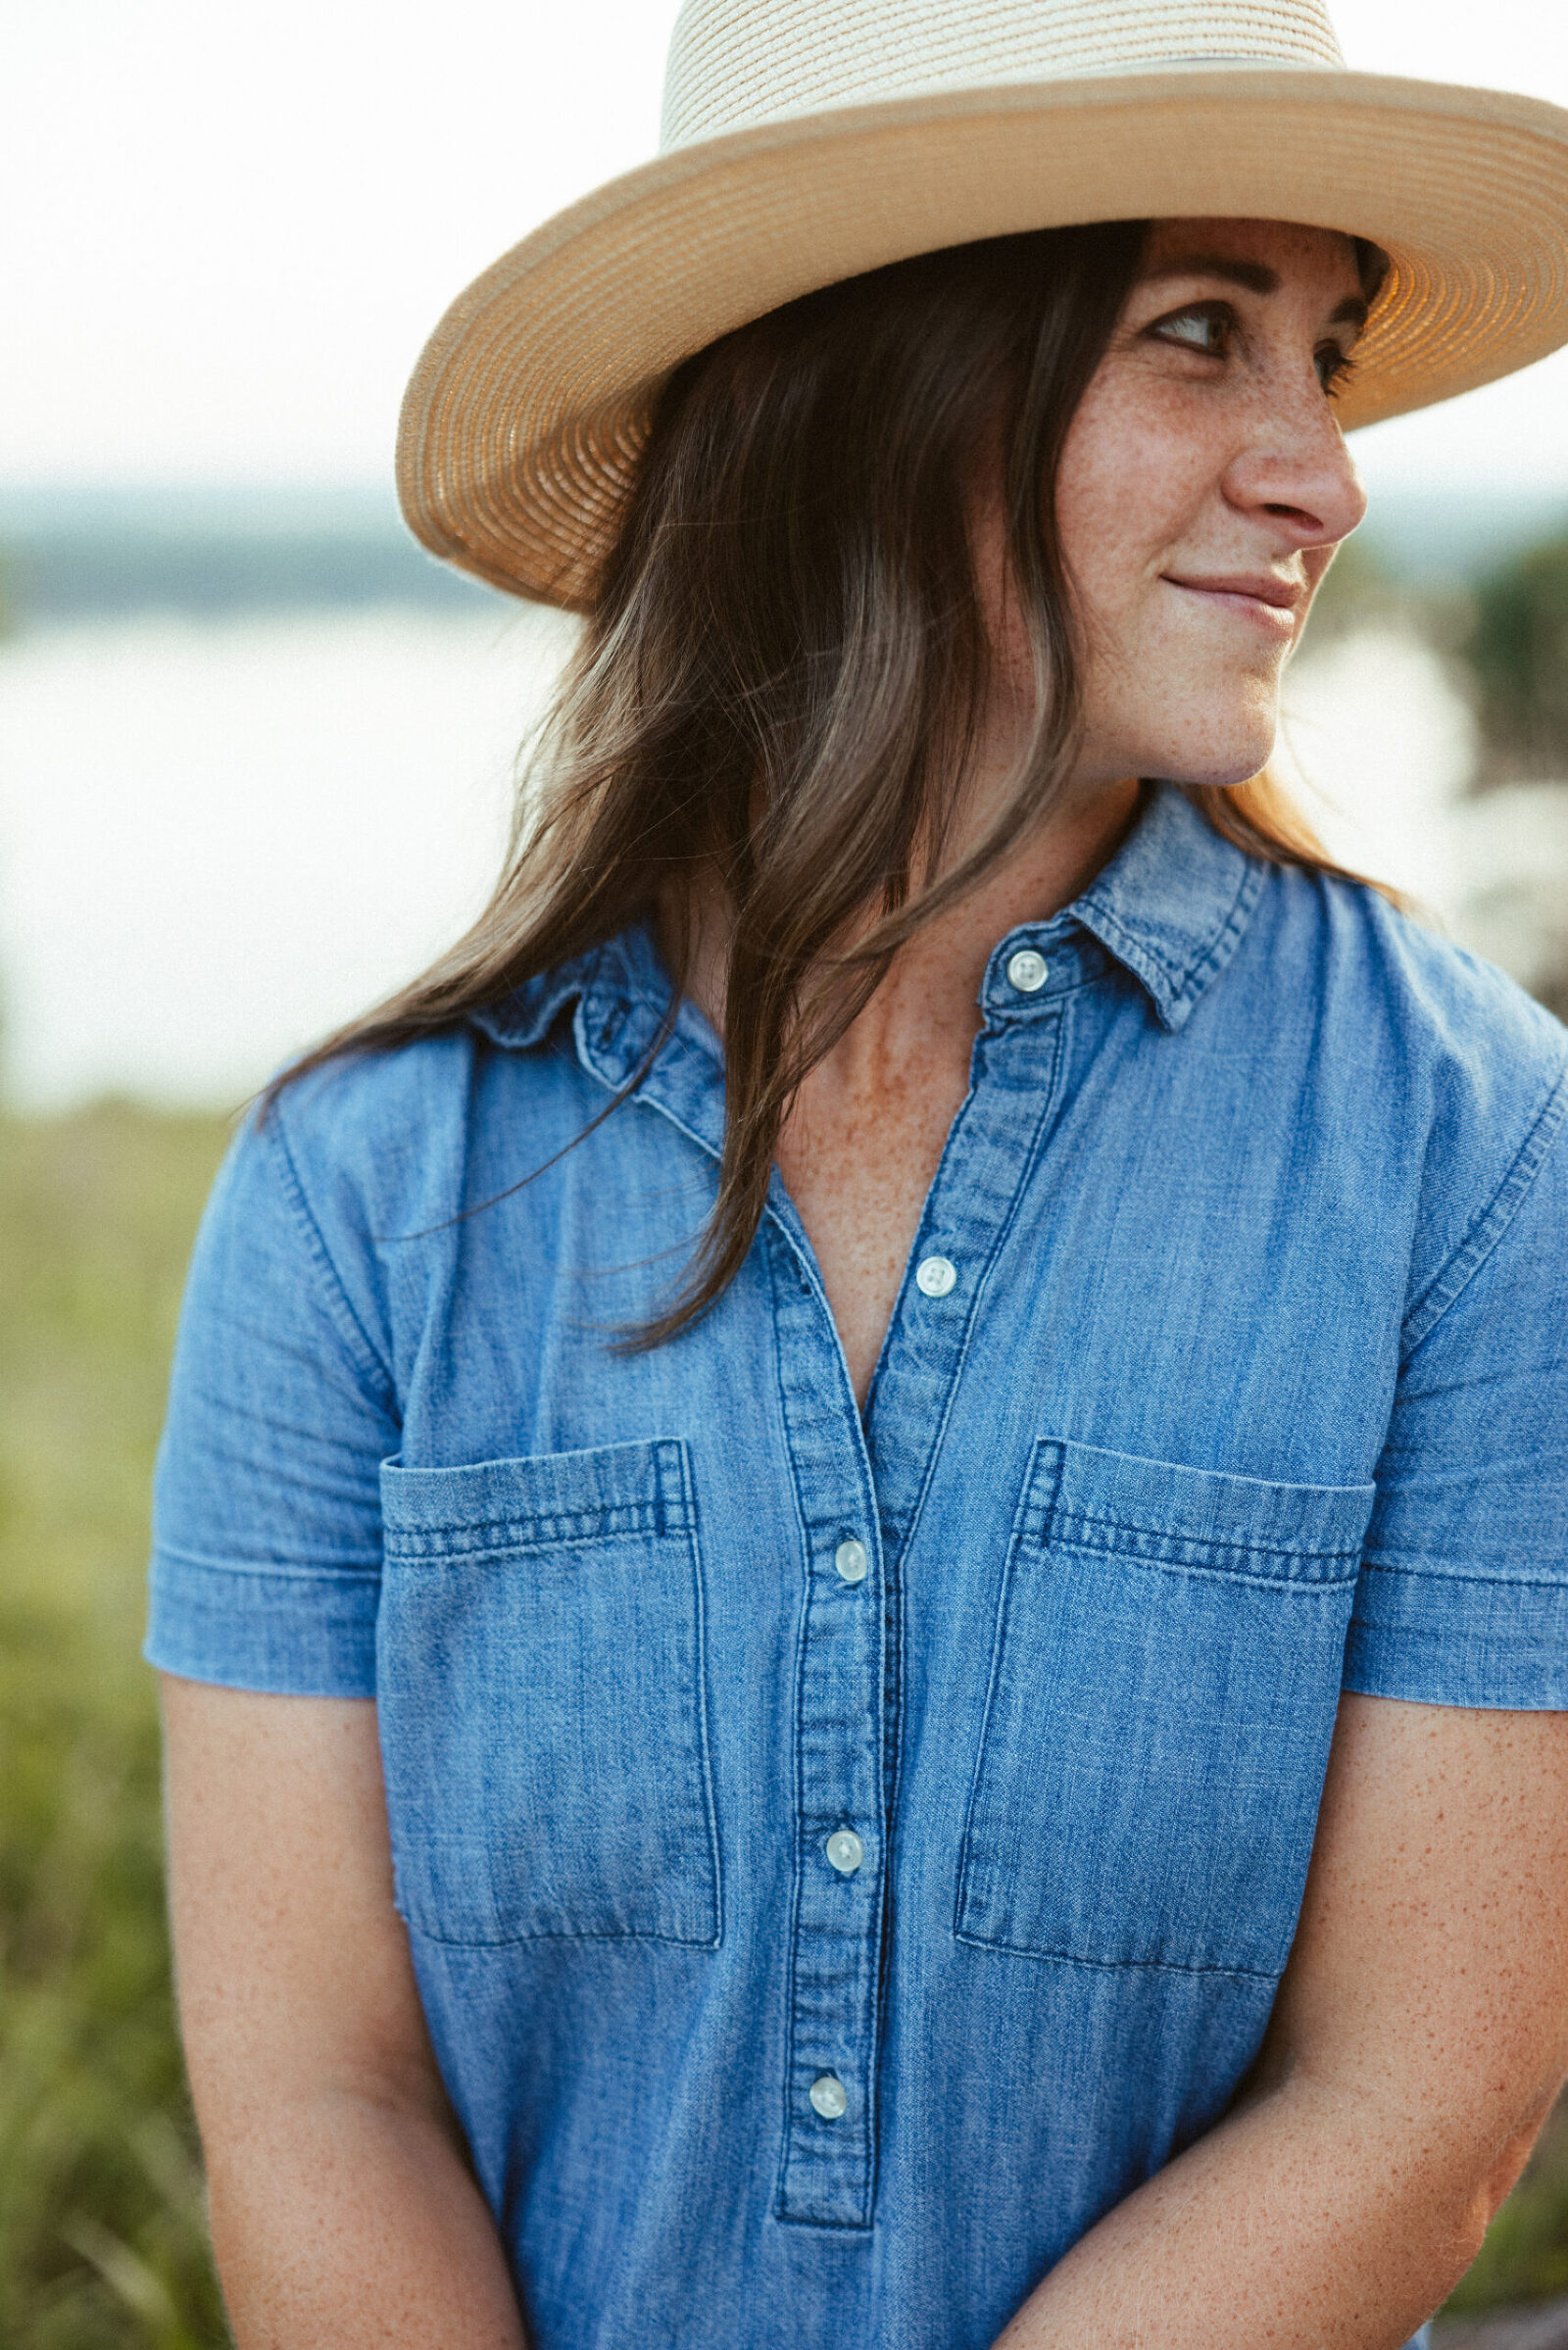 36-year-old woman wearing a denim dress and a hat looking over her shoulder